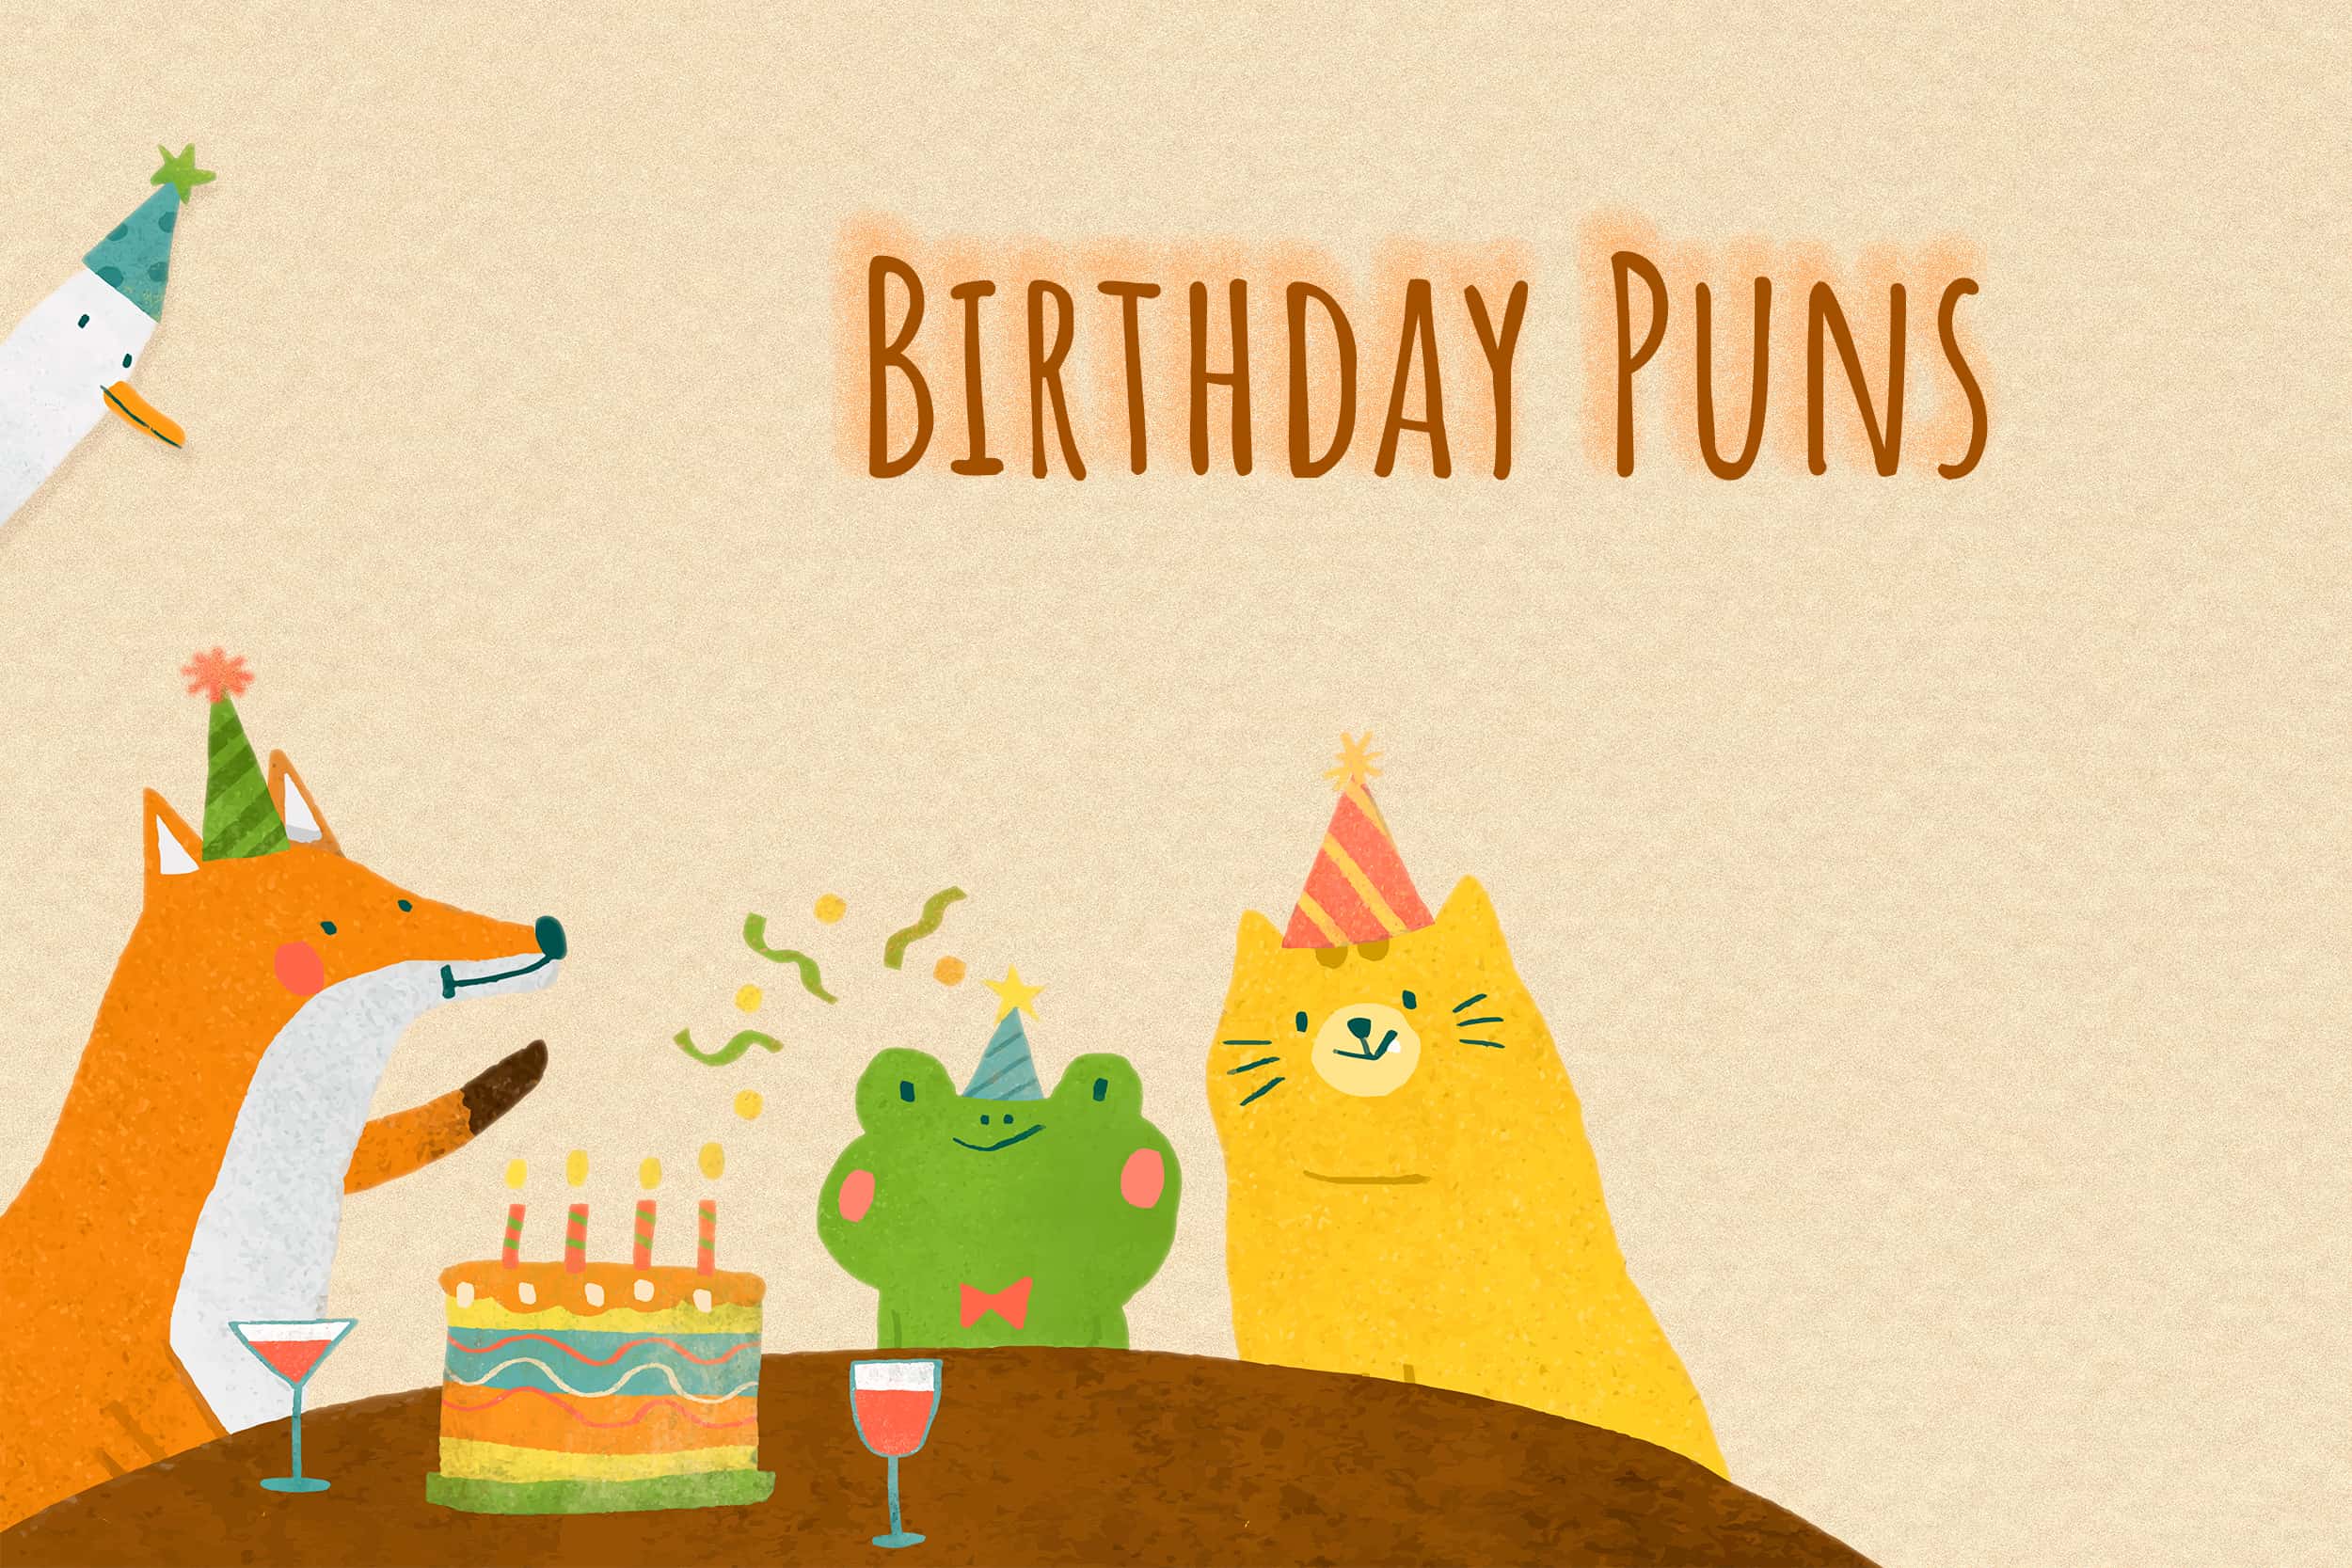 100 Funny Birthday Puns That Takes The Cake